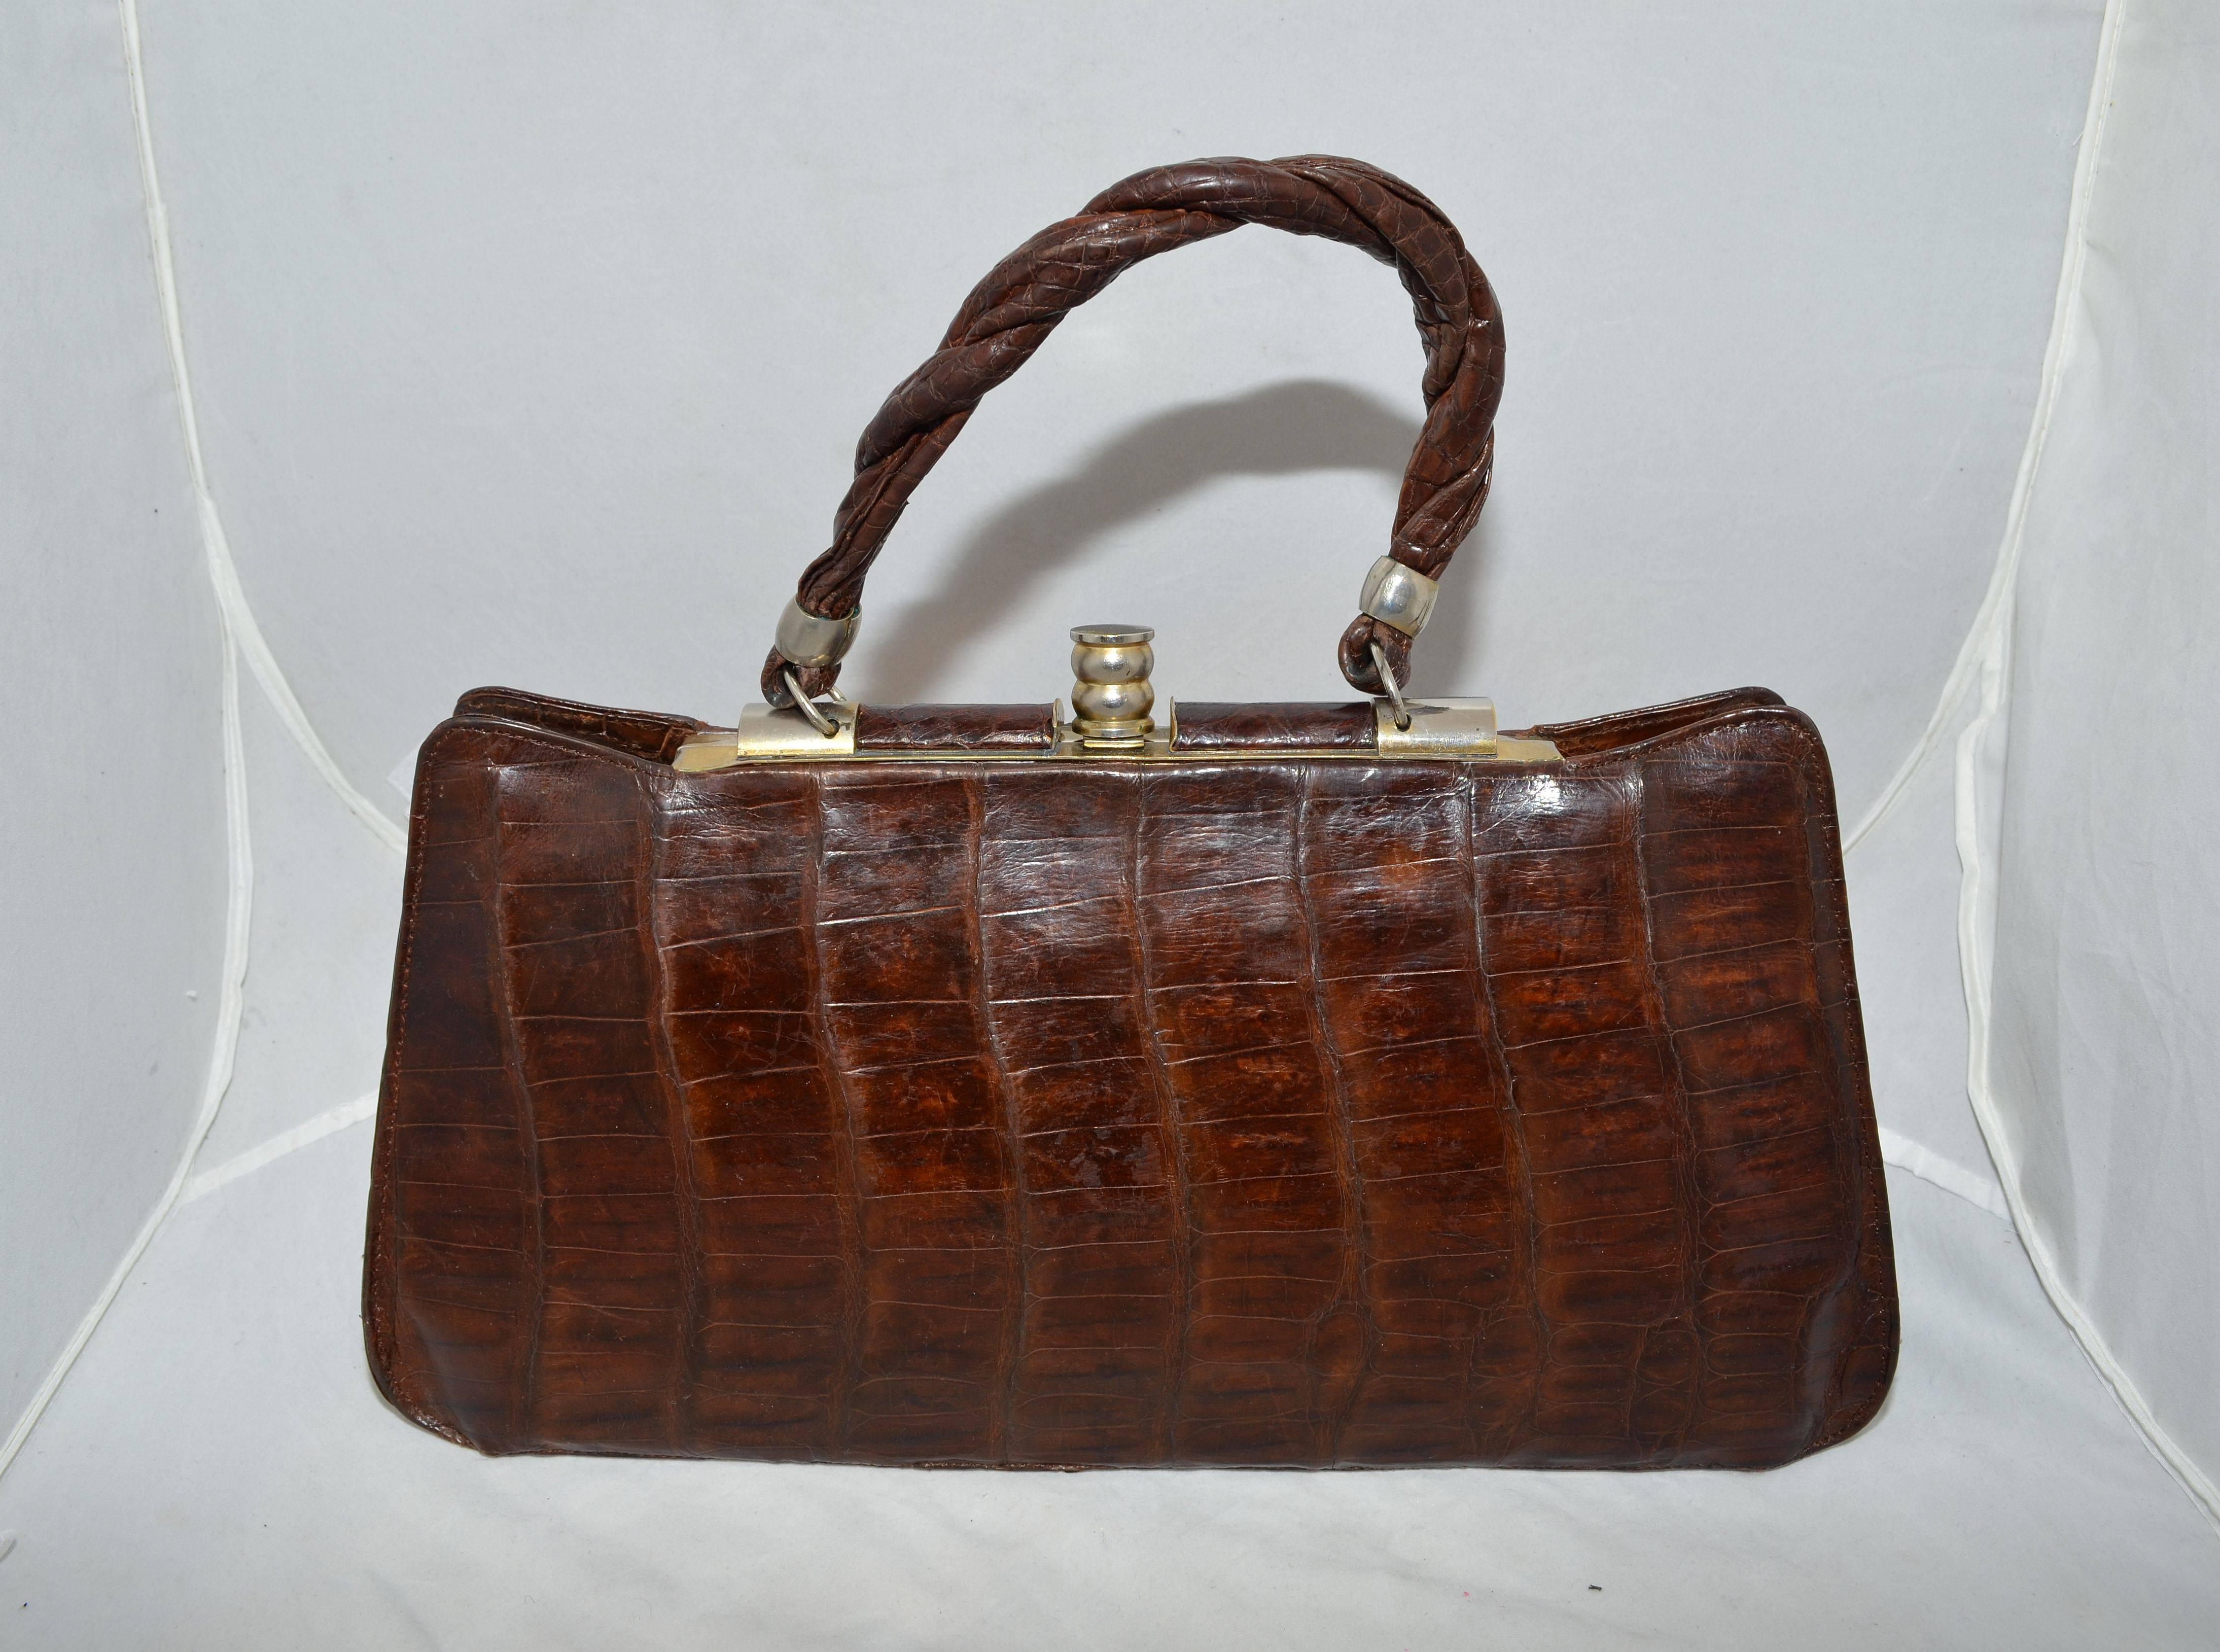 Vintage alligator clutch bag from the 1940's featured in brown with gold-tone brass hardware, twisted alligator strap along the front center and a twisted top handle. Lift clasp closure at the top and fully lined in suede. Interior features four